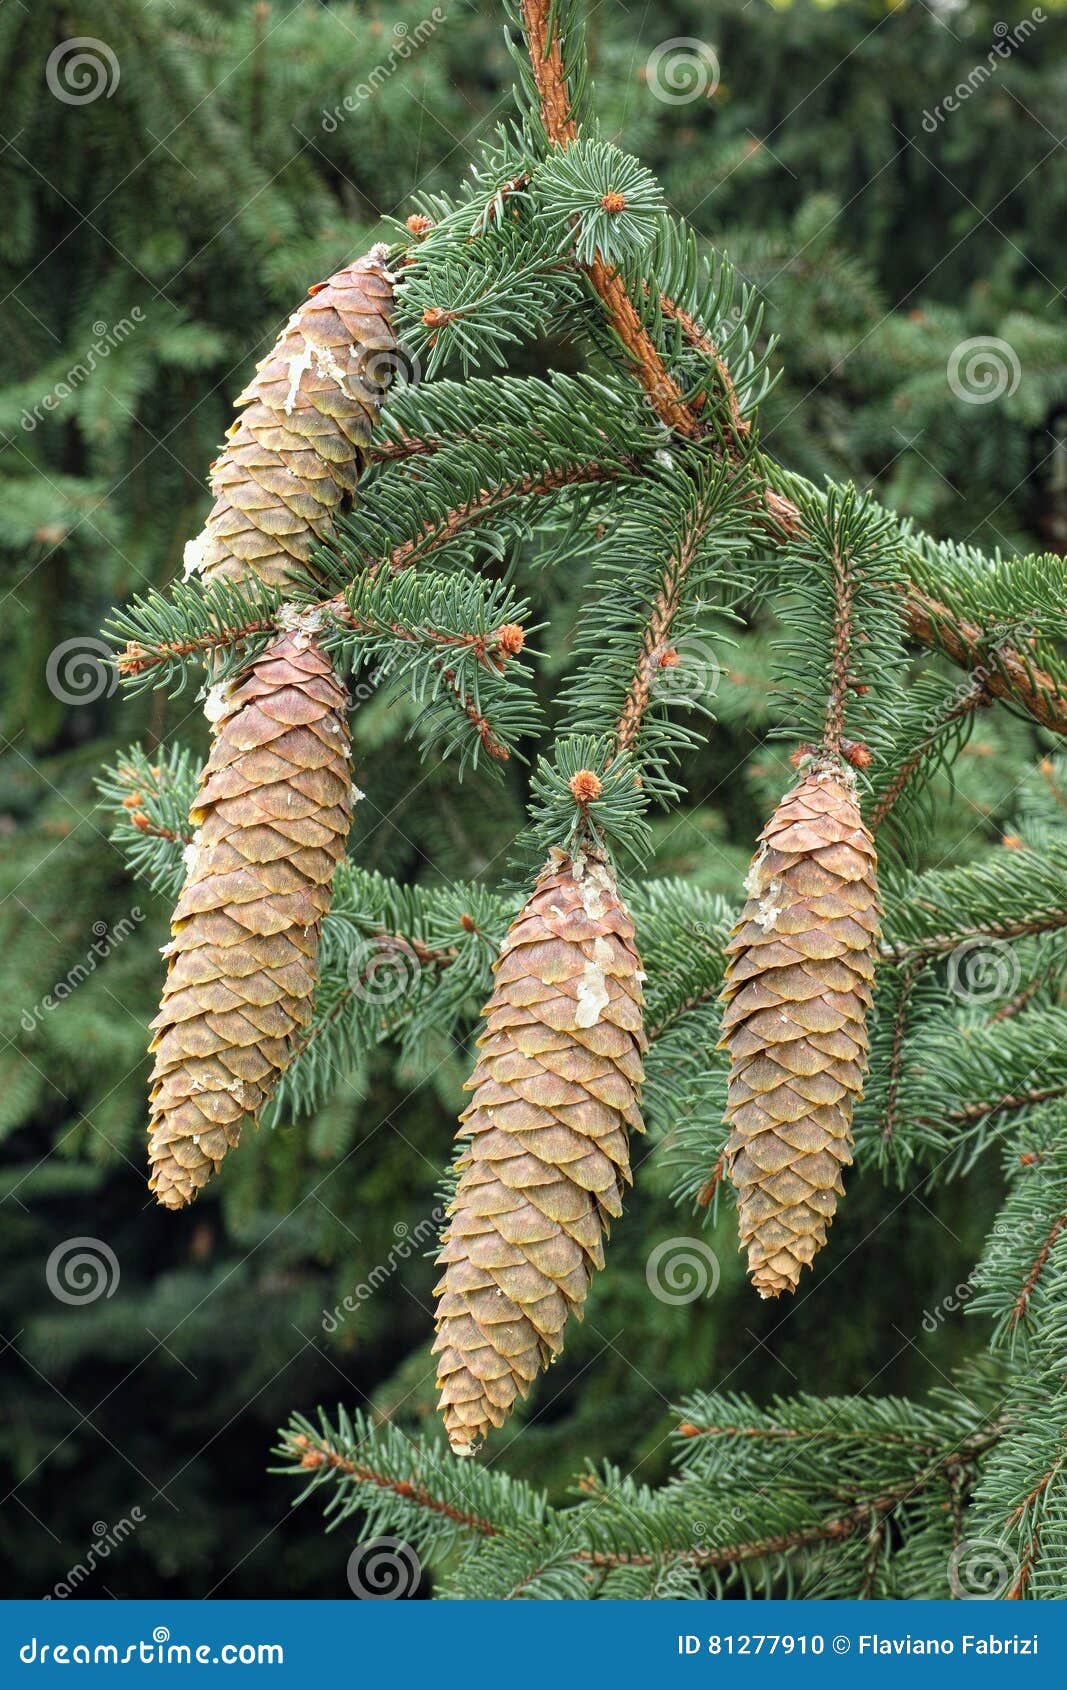 Norway Spruce Cones And Leaves Stock Photo Image Of Flora Spruce